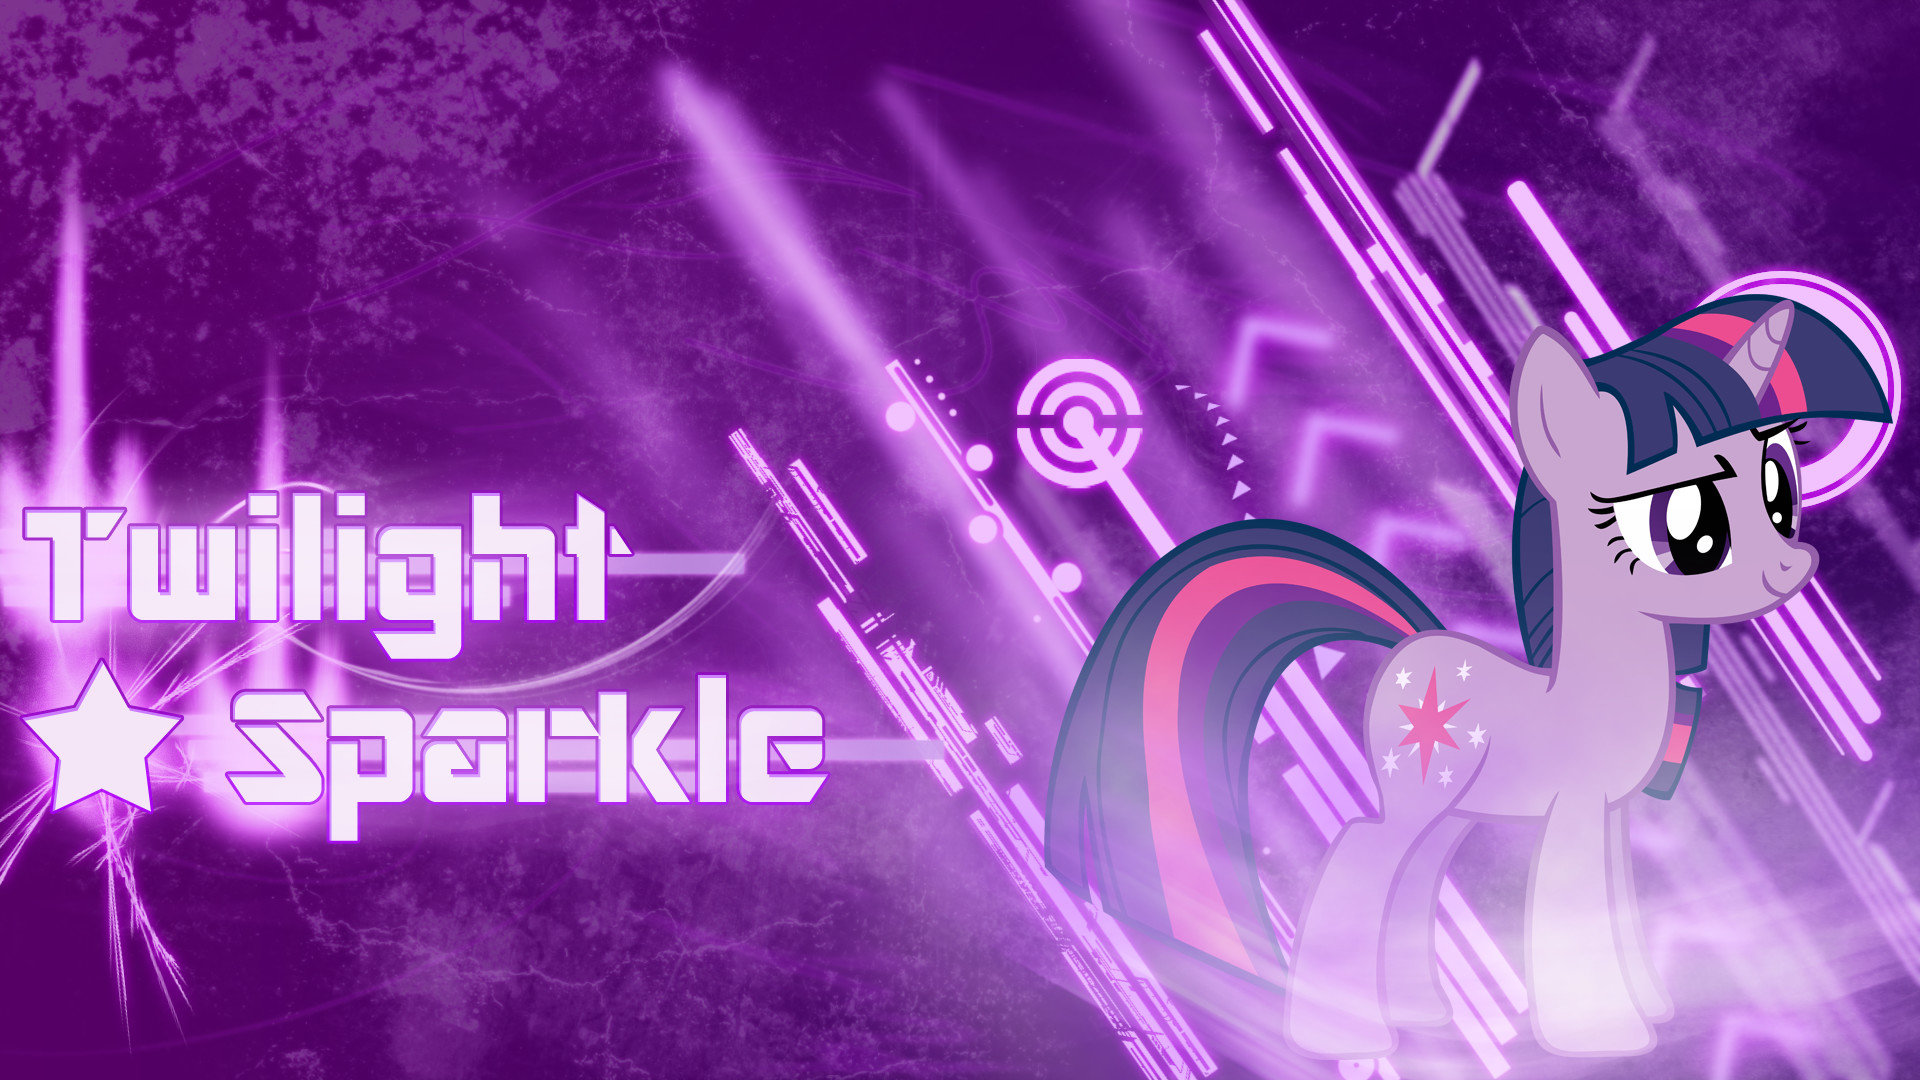 Download full hd 1920x1080 Twilight Sparkle computer wallpaper ID:154340 for free